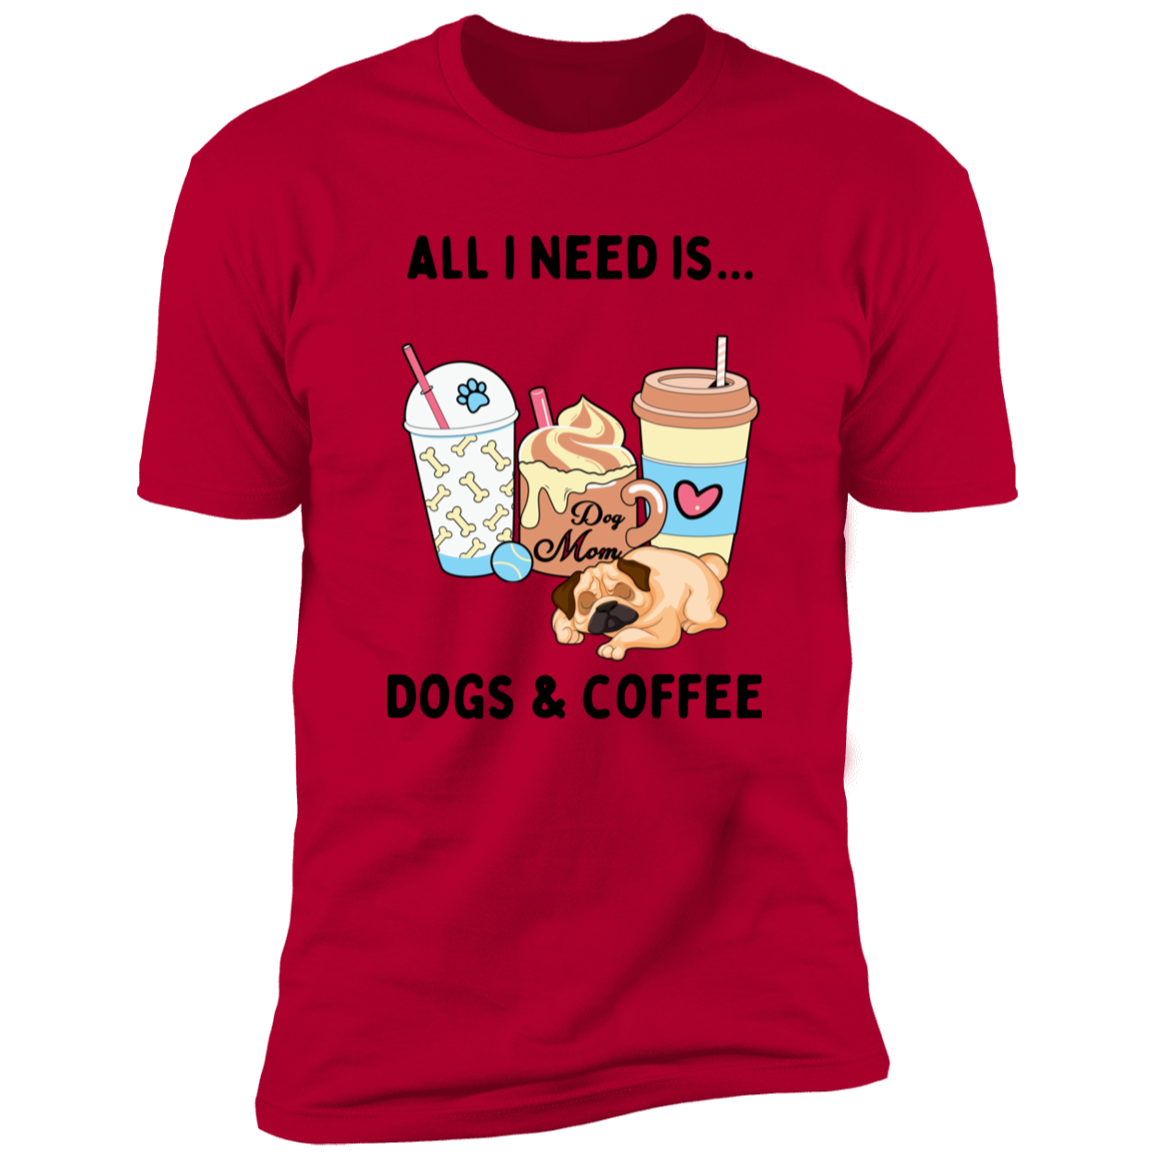 All I Need is Dogs and Coffee, Dog shirt for humas, in red